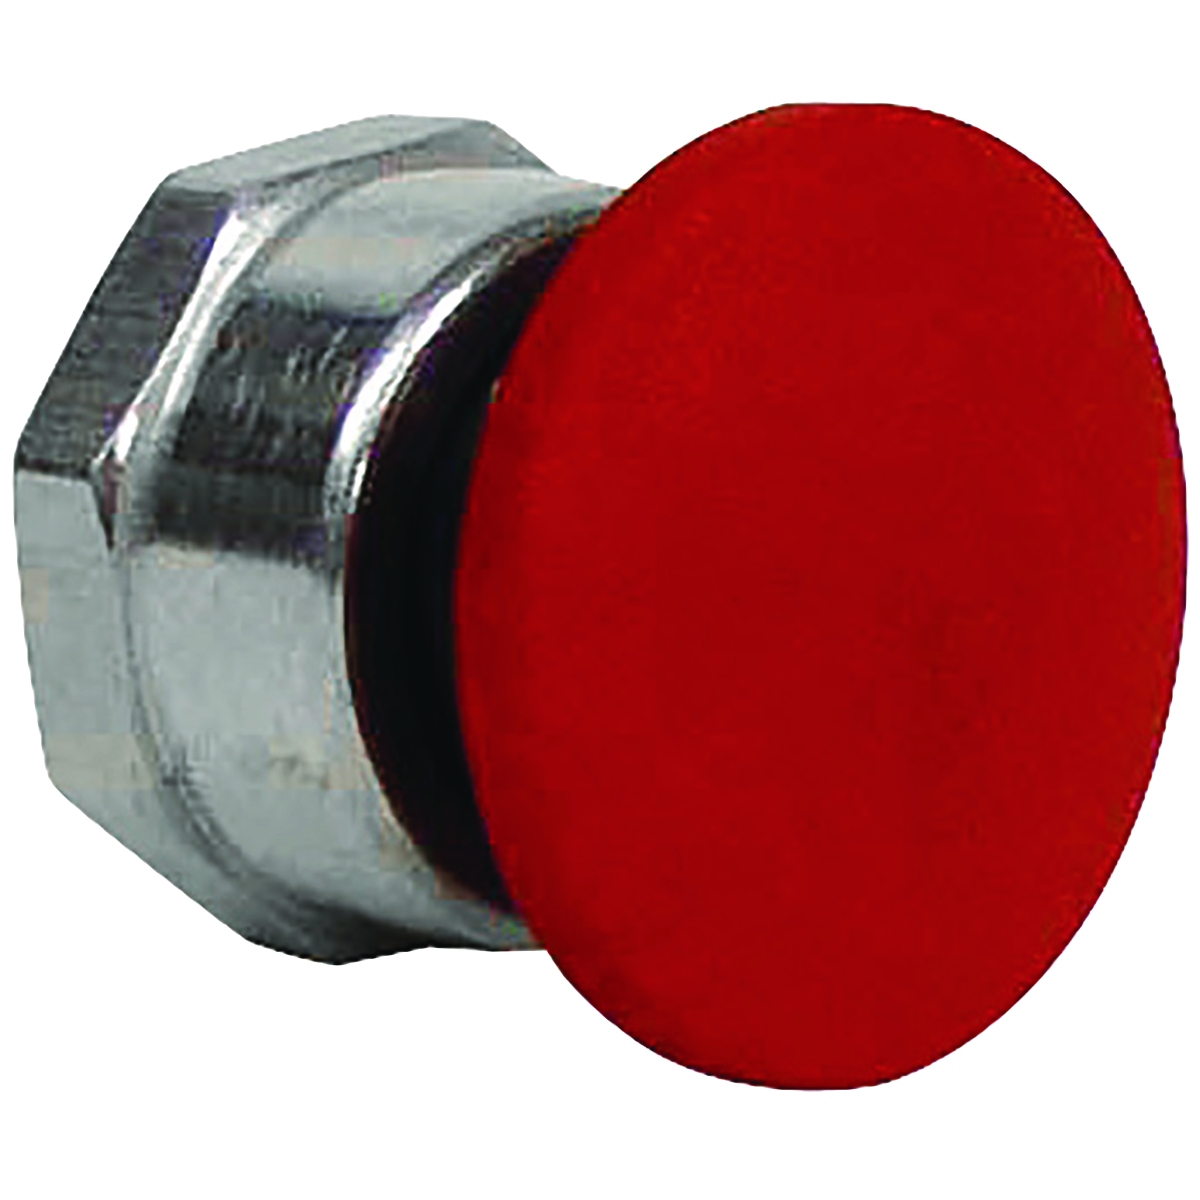 G SERIES - RED STANDARD SIZE MOMENTARY MUSHROOM HEAD FOR USE WITHGO1/GO21/GOL1 SERIES PUSH BUTTONS